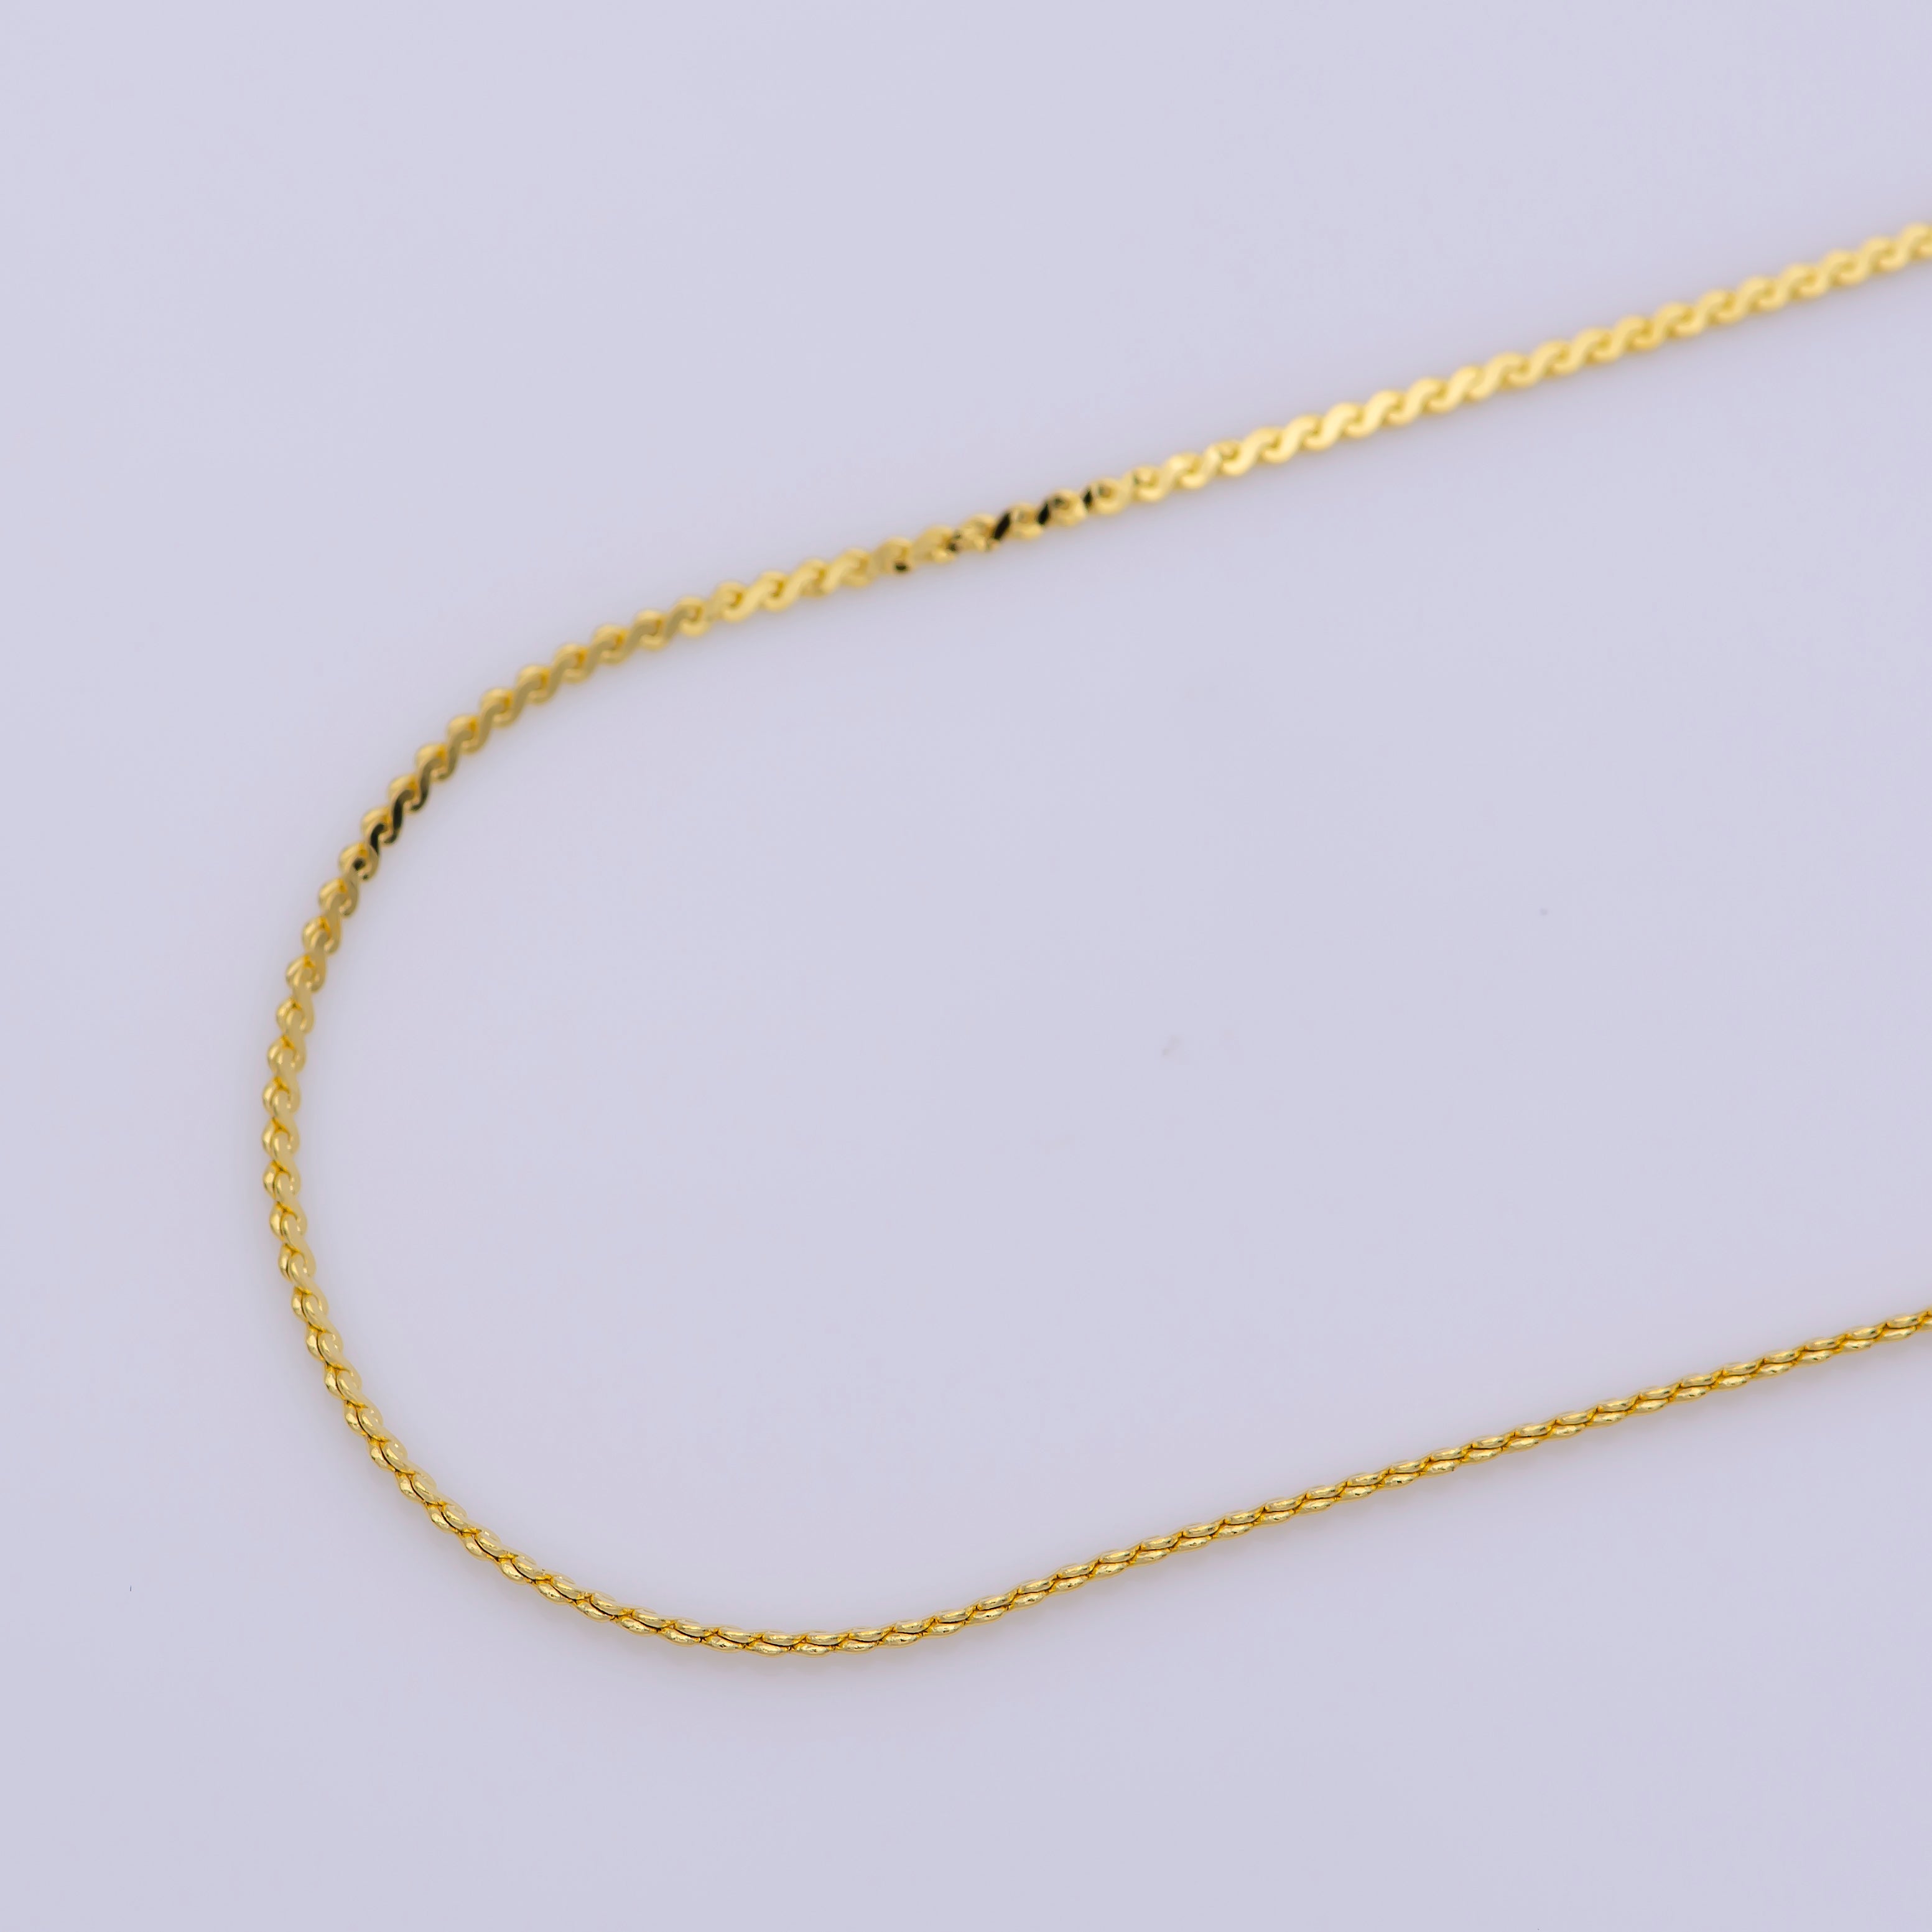 Clearance Pricing BLOWOUT 17 inch Unique Necklace, 24K Gold Plated Finished  Chain For Jewelry Making, Dainty 2mm Unique Necklace w/Spring Ring, CN-332